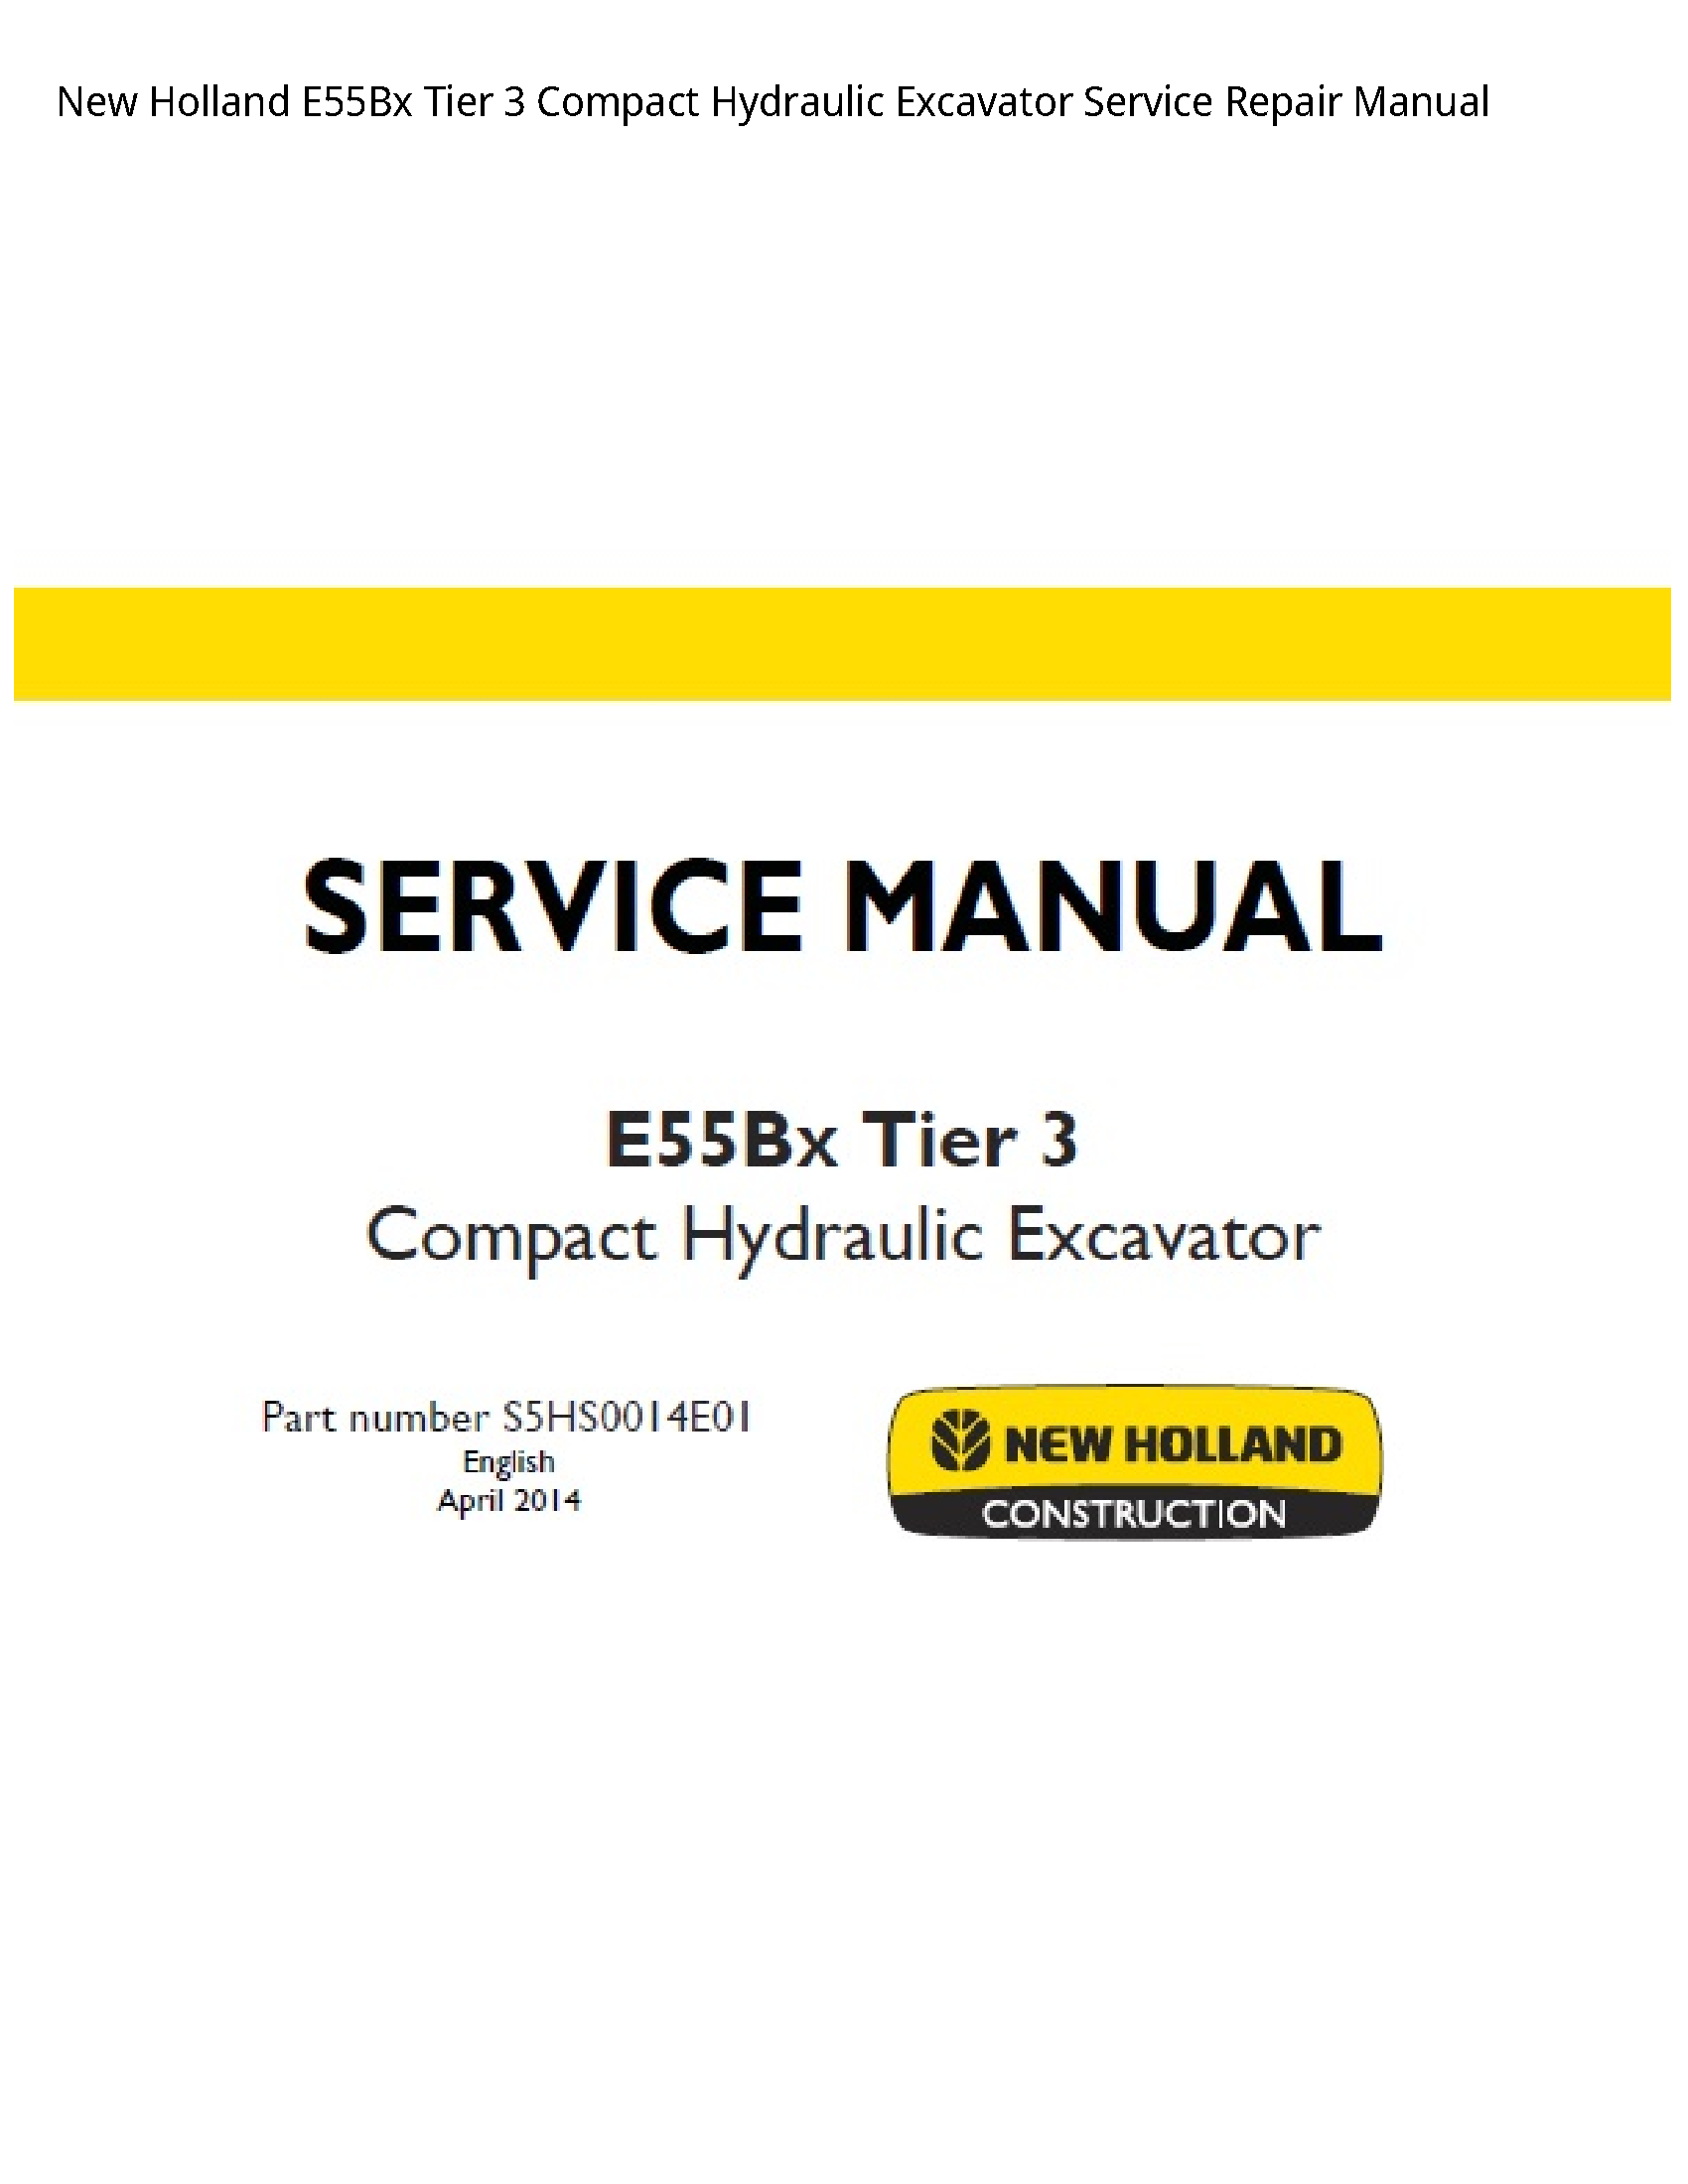 New Holland E55Bx Tier Compact Hydraulic Excavator manual